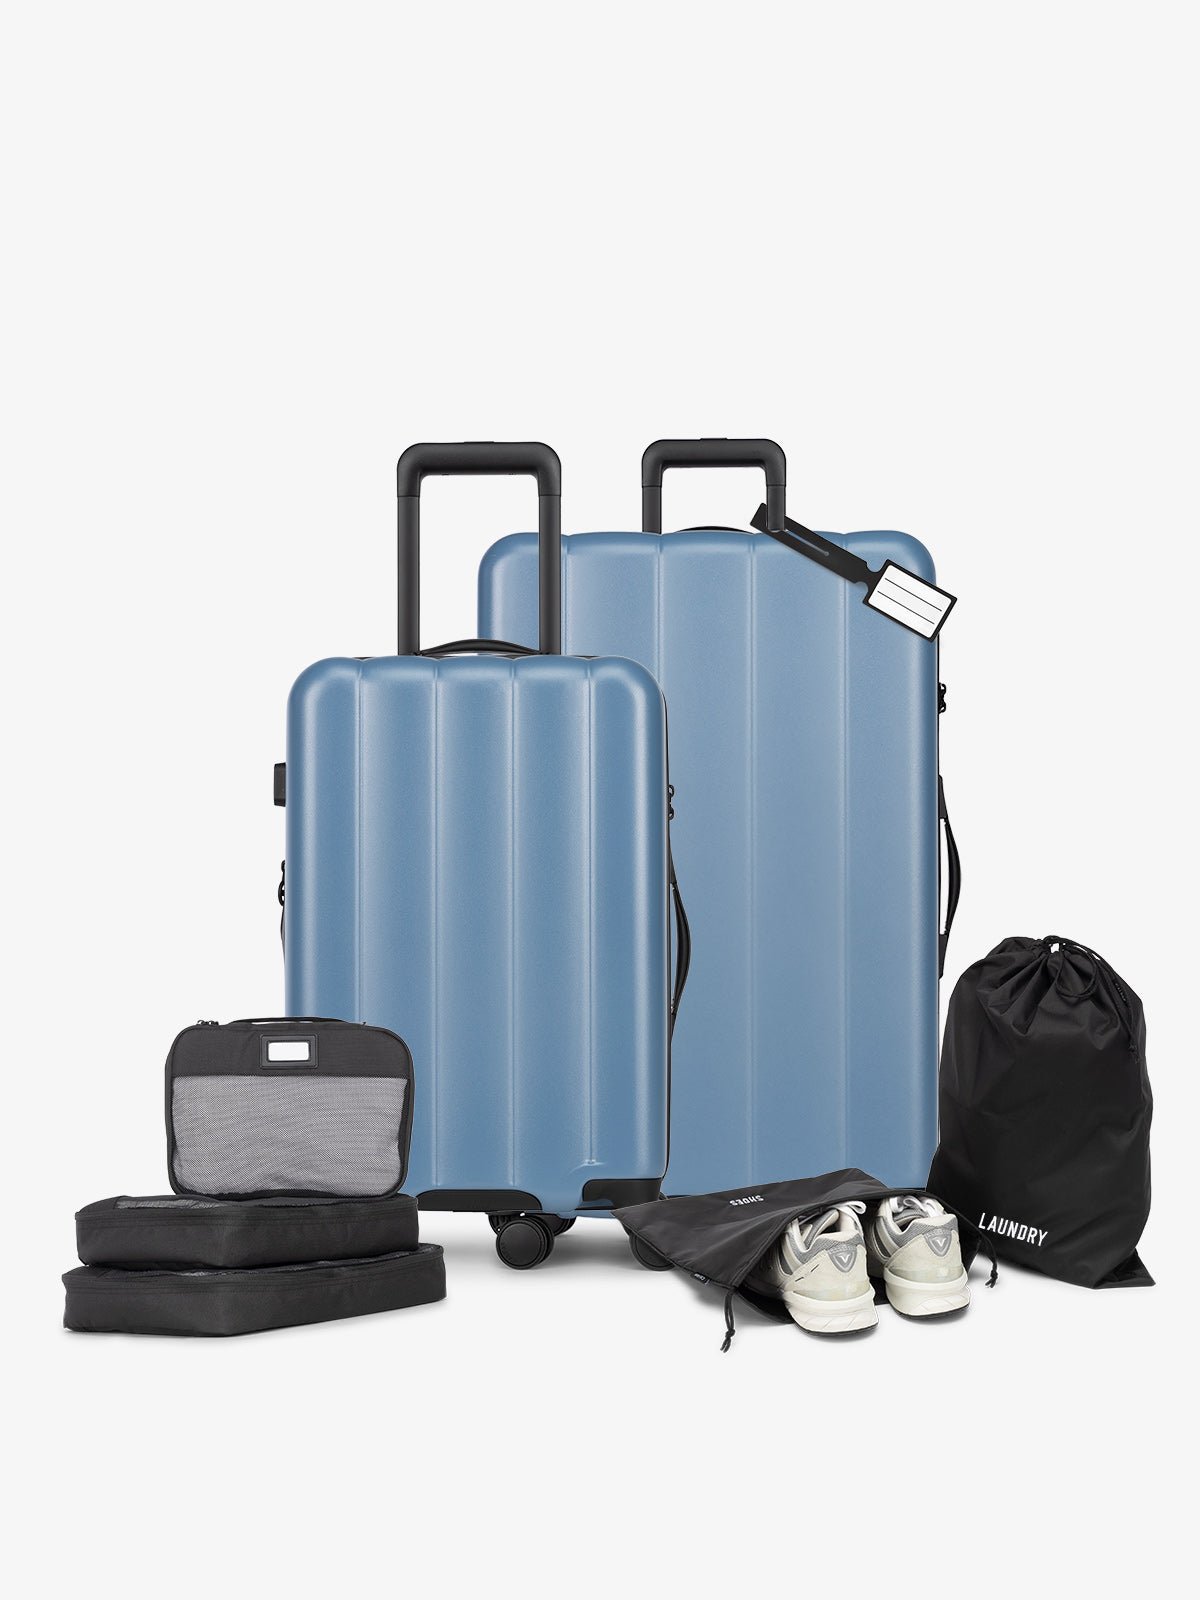 CALPAK Starter Luggage Set with Carry-On, Large Luggage, Packing Cubes, Pouches and Luggage tag in blue